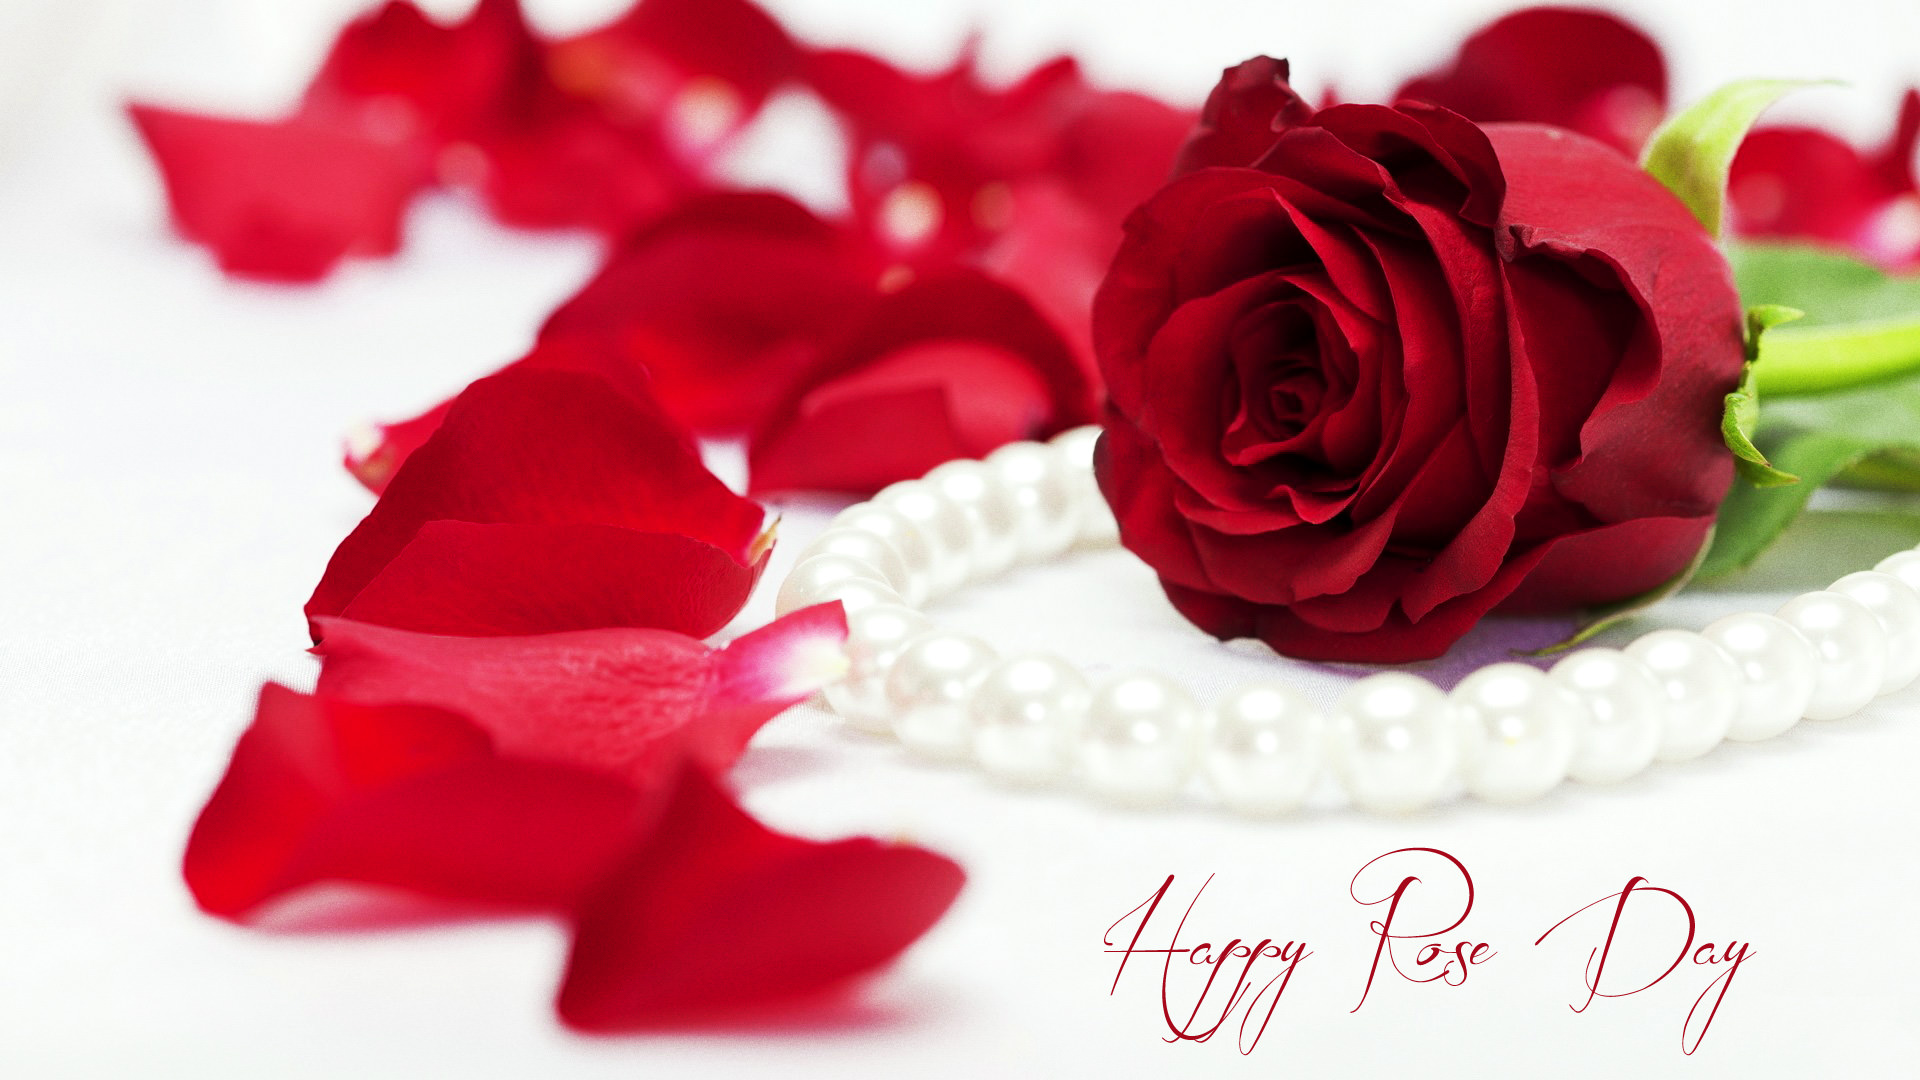 Single Rose Wallpaper for 1st day of Valentine Week